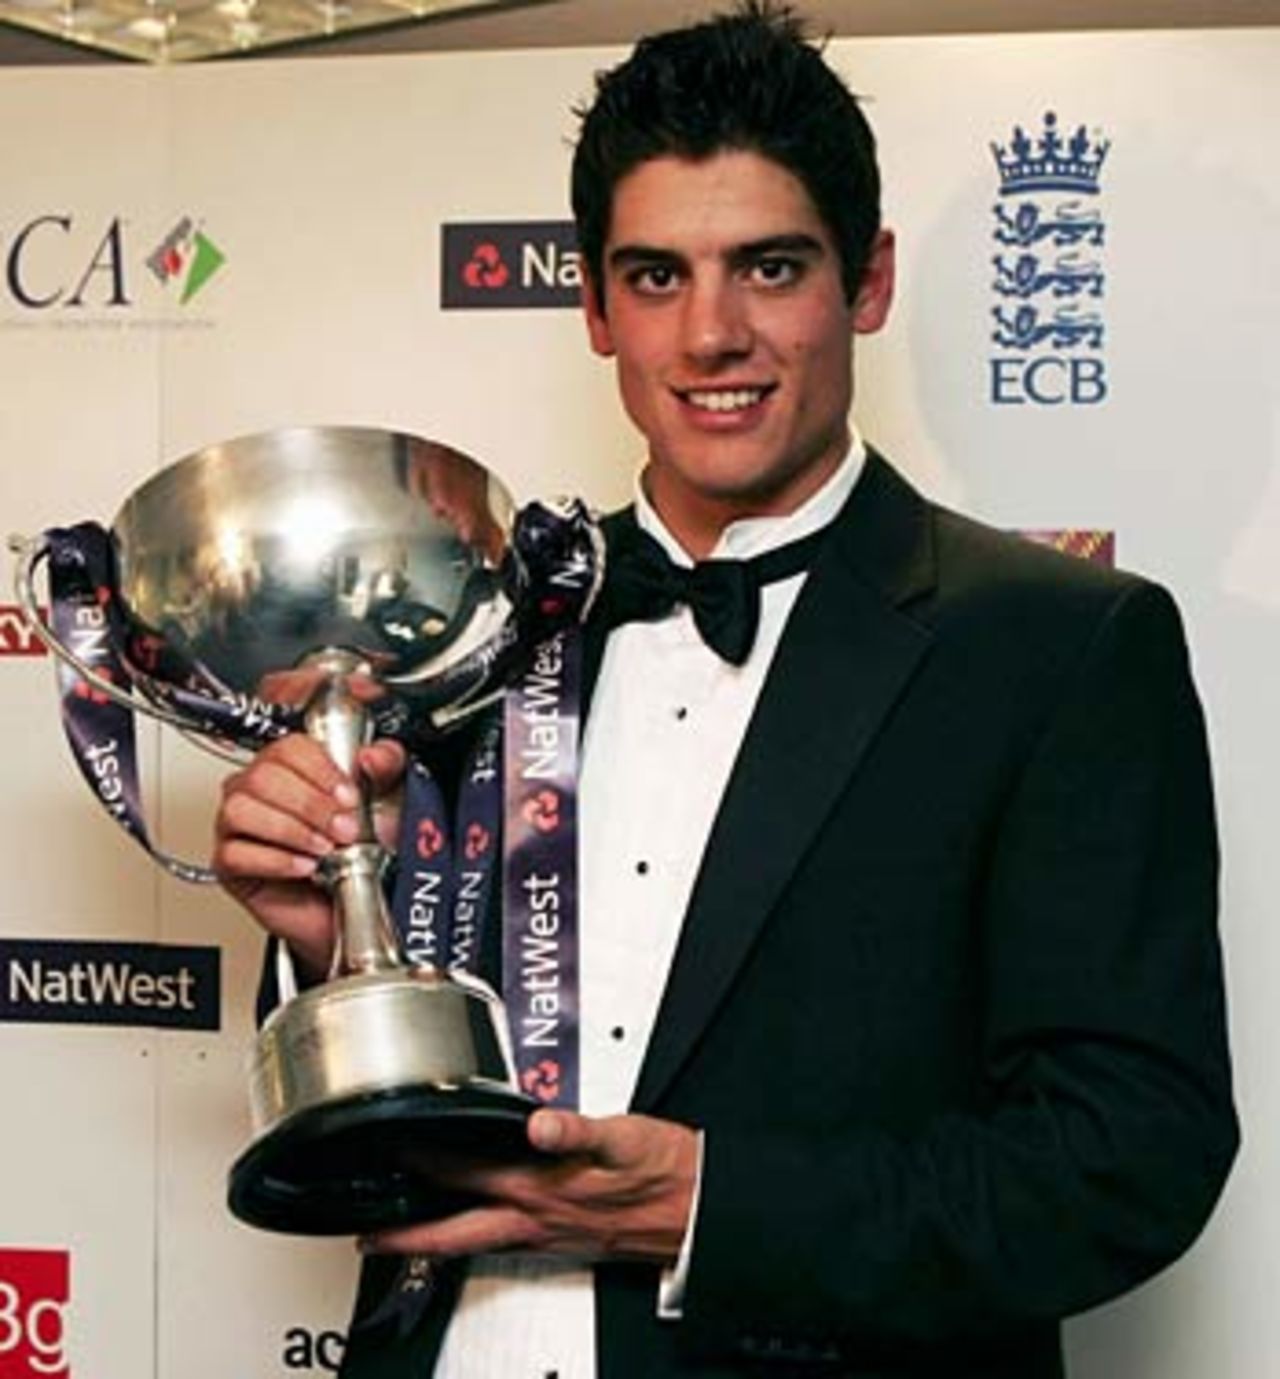 Alastair Cook holds up his trophy after being named the PCA Young Player of the Year at The Royal Albert Hall, London, September 26, 2005 